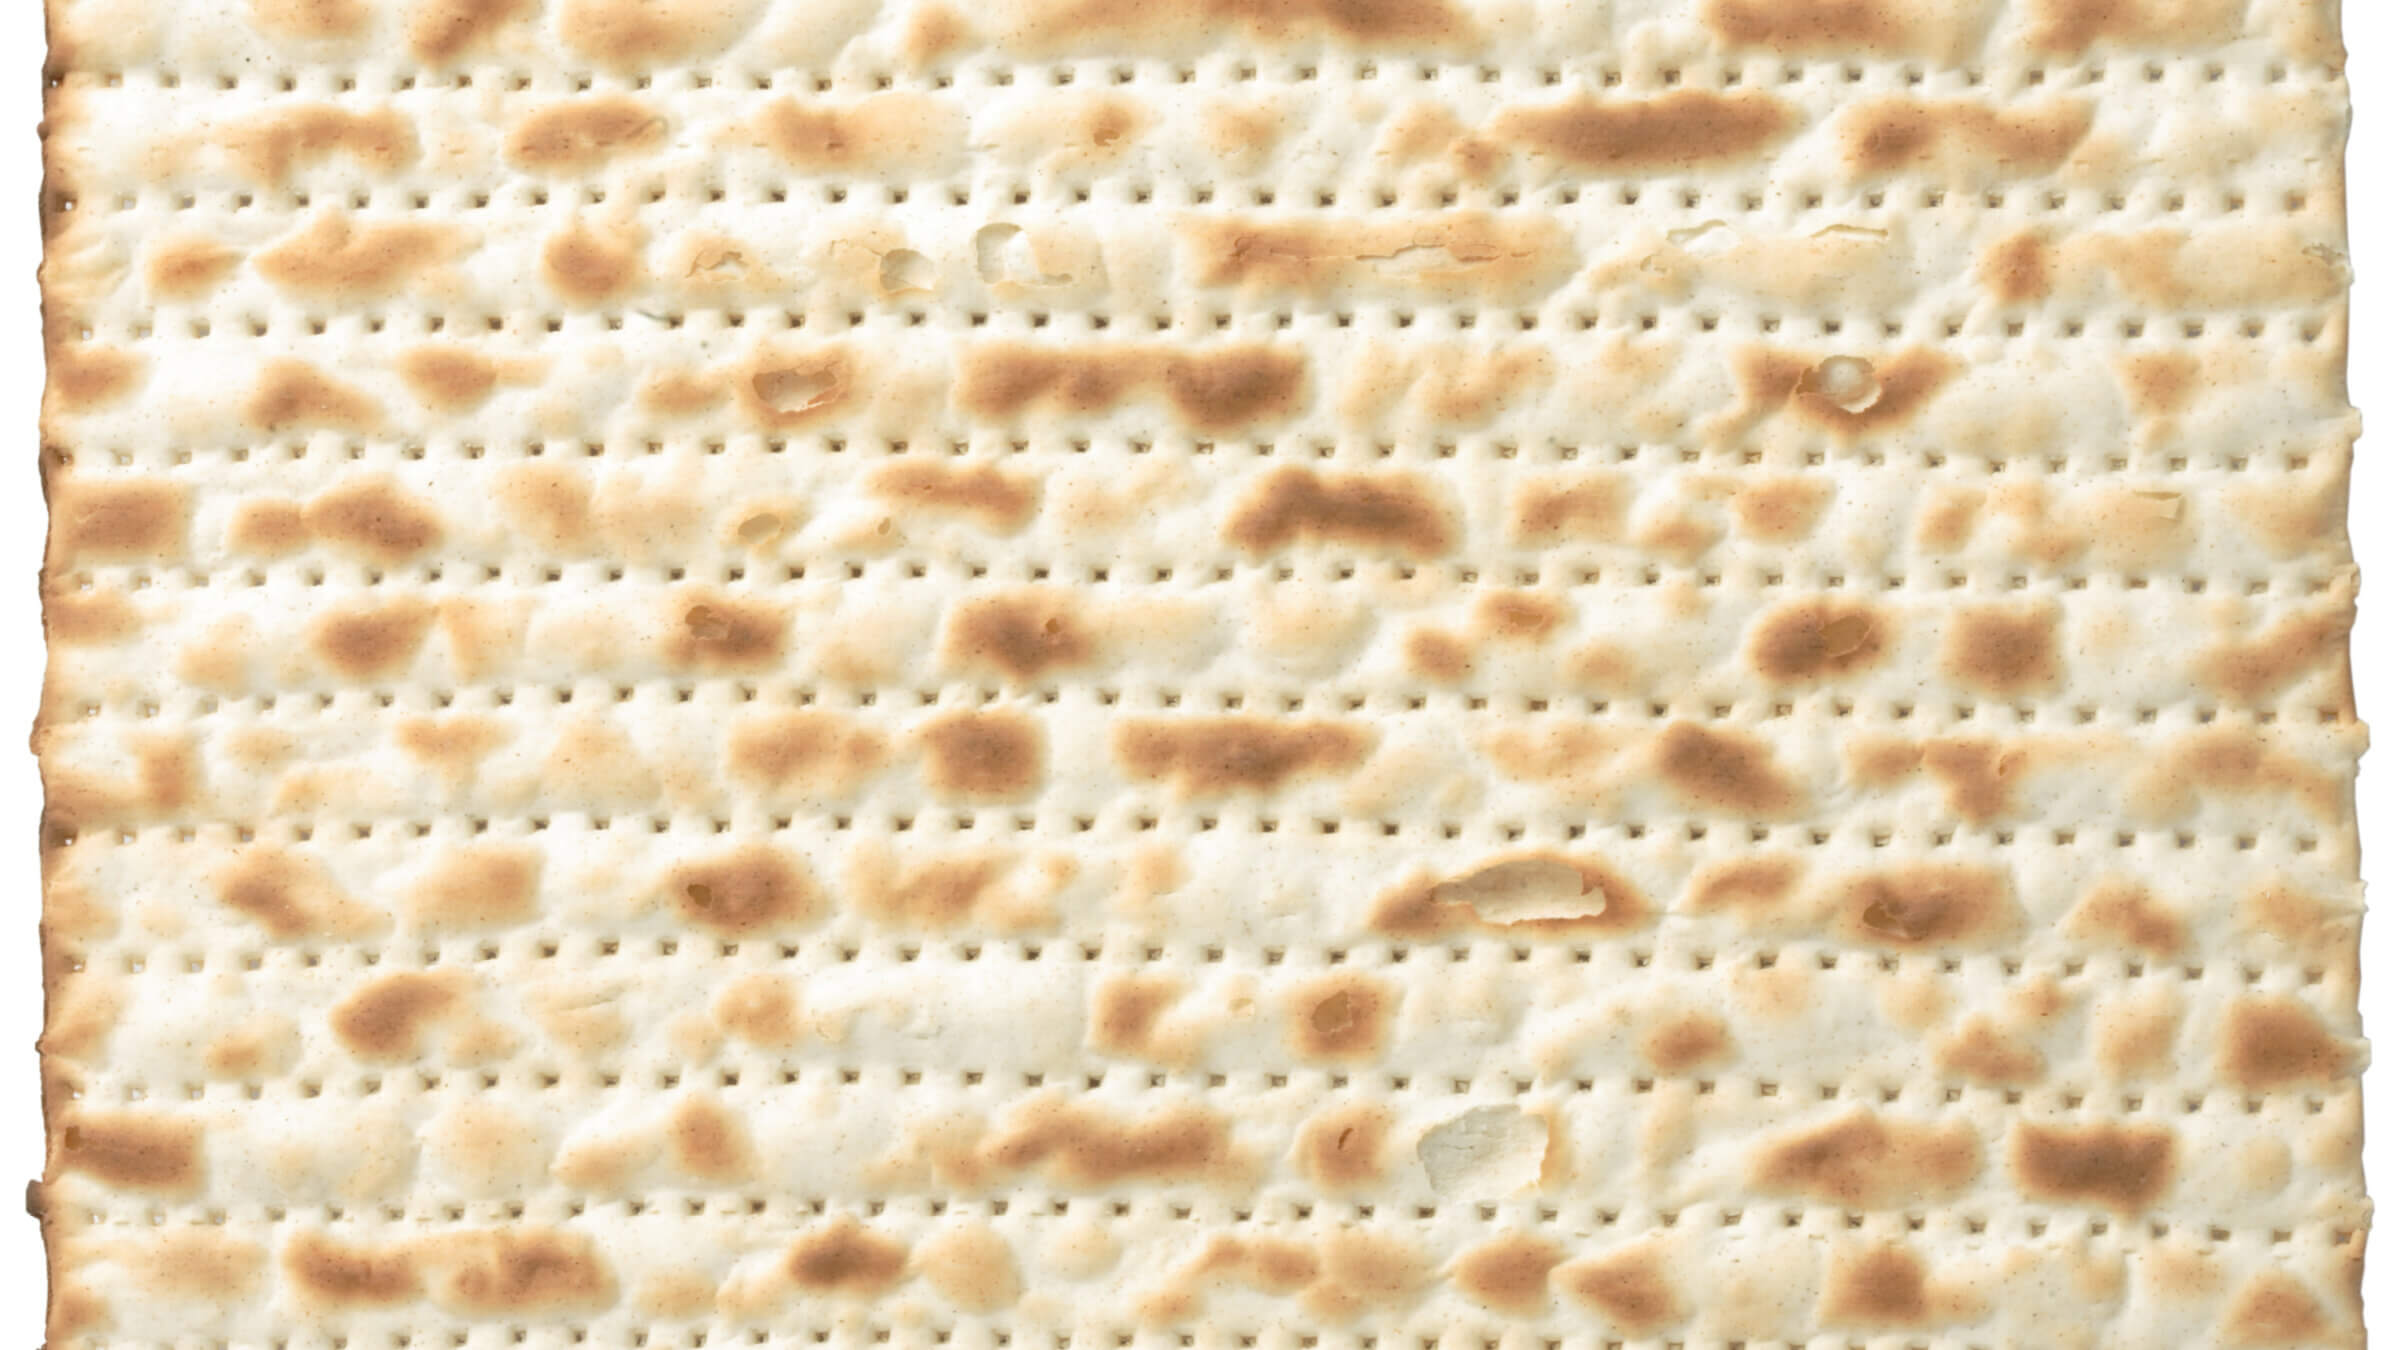 Hard matzo may have come about as a result of a rabbinic push to bake matzo before Passover, and over concerns about the insides of soft matzo being ocassionally undercooked and, therefore, chametz.